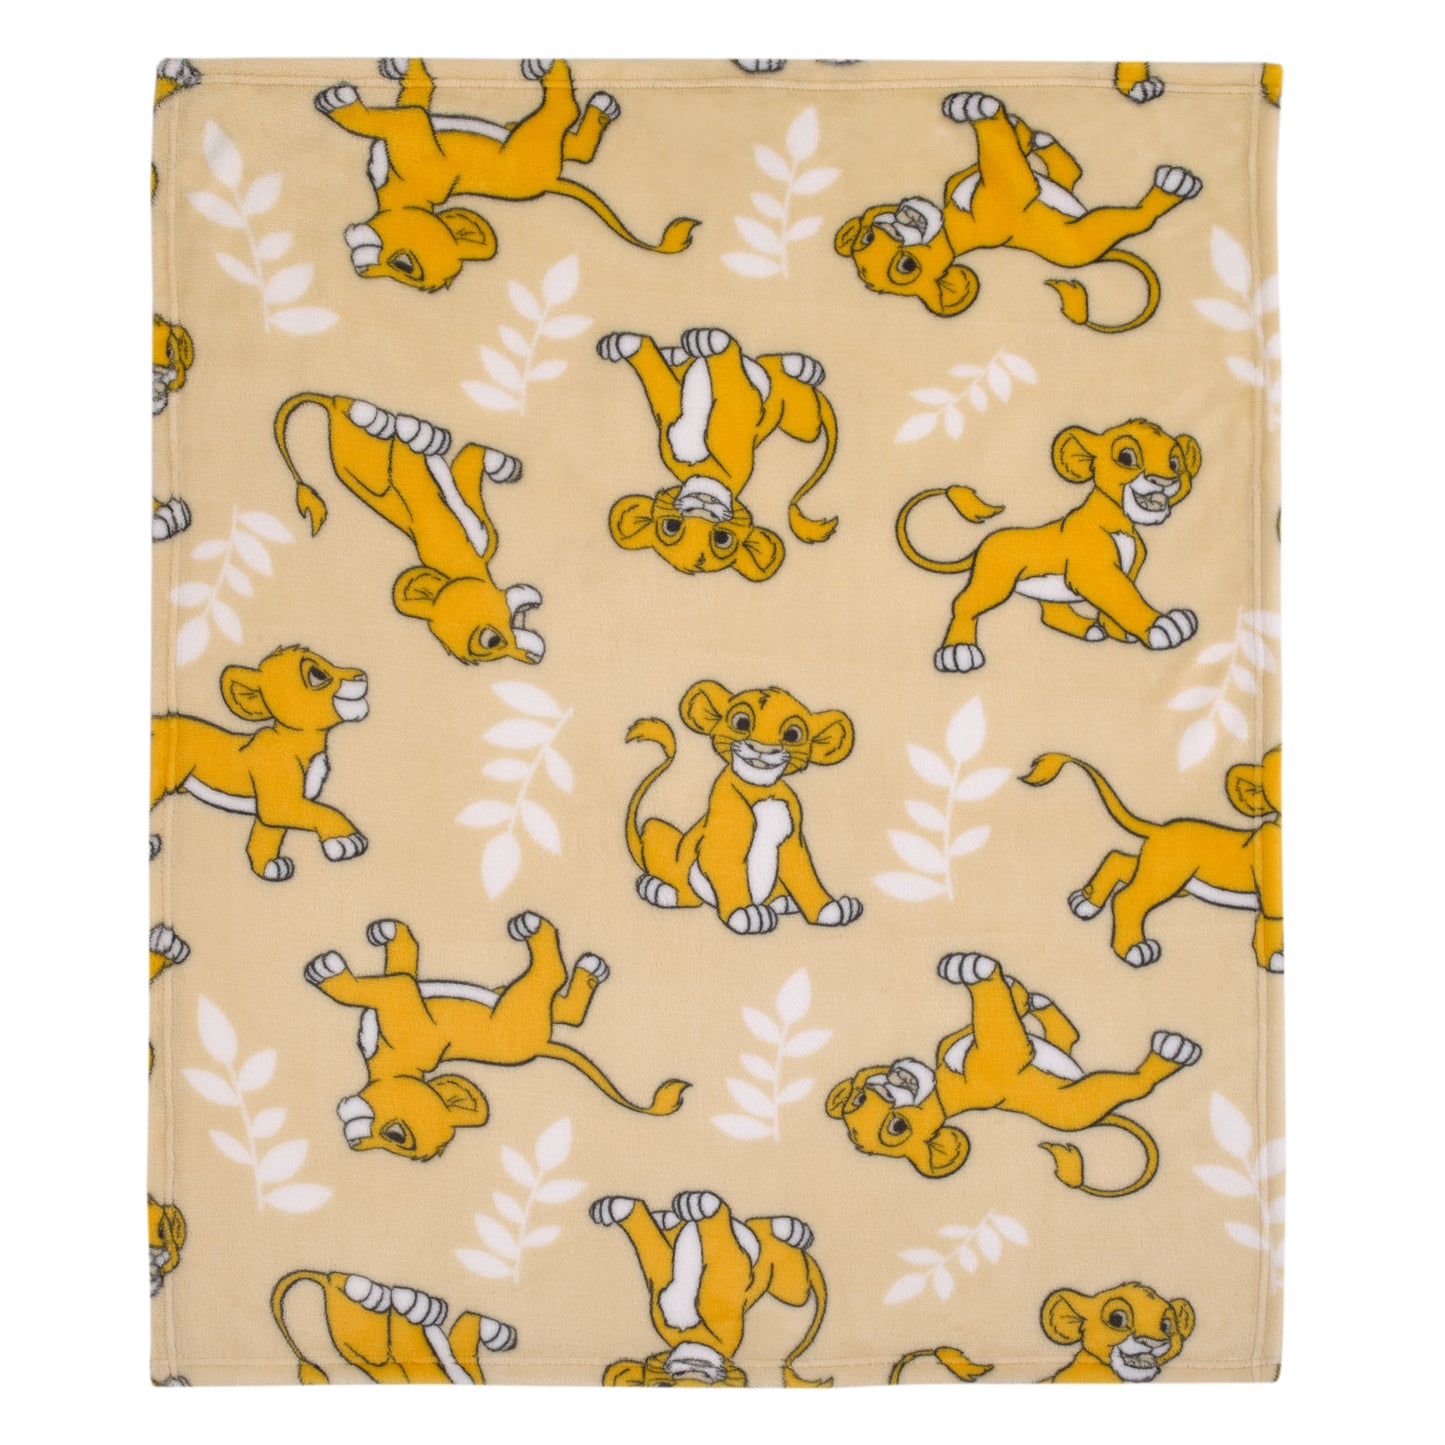 Disney Lion King Tan, Beige and White Simba Super Soft Baby Blanket